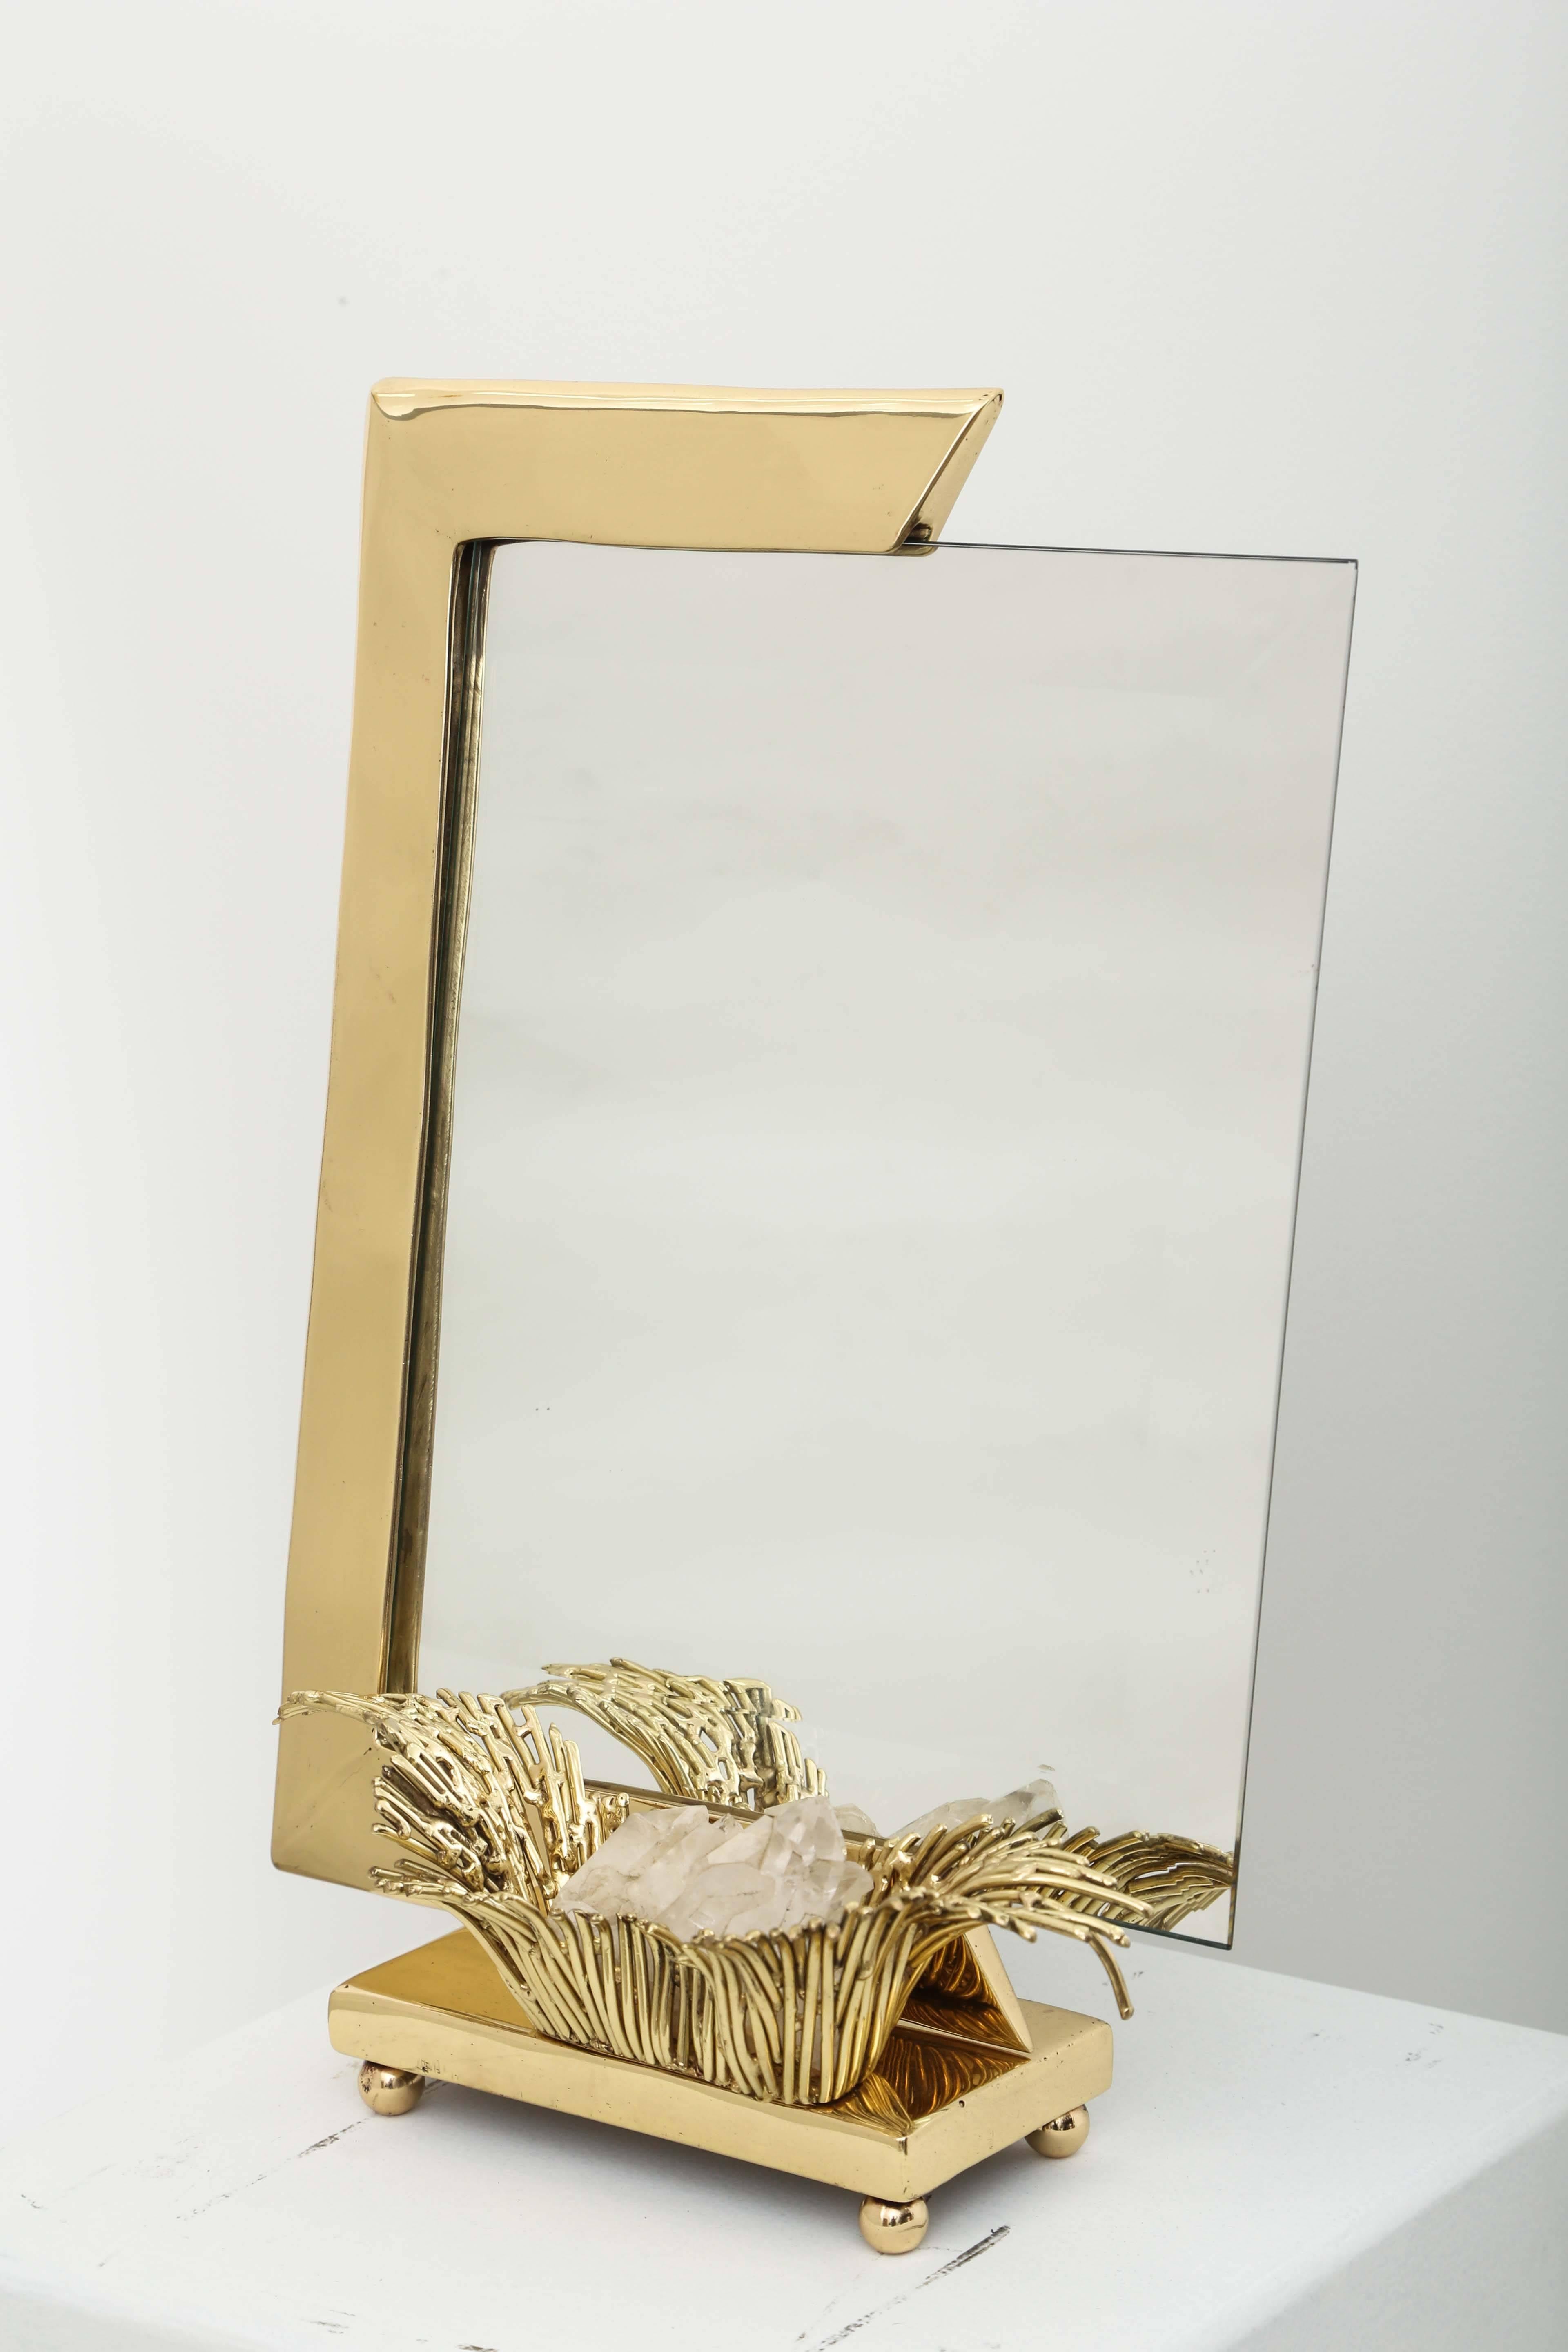 Refined and elegant sculpture Table Mirror by J. Duval Brasseur.
A  bronze nest stands on the front part, a rock crystal géode inside  .
a unic piece signed by the artist.
Bevelled mirror standing in a assimetric way.
   